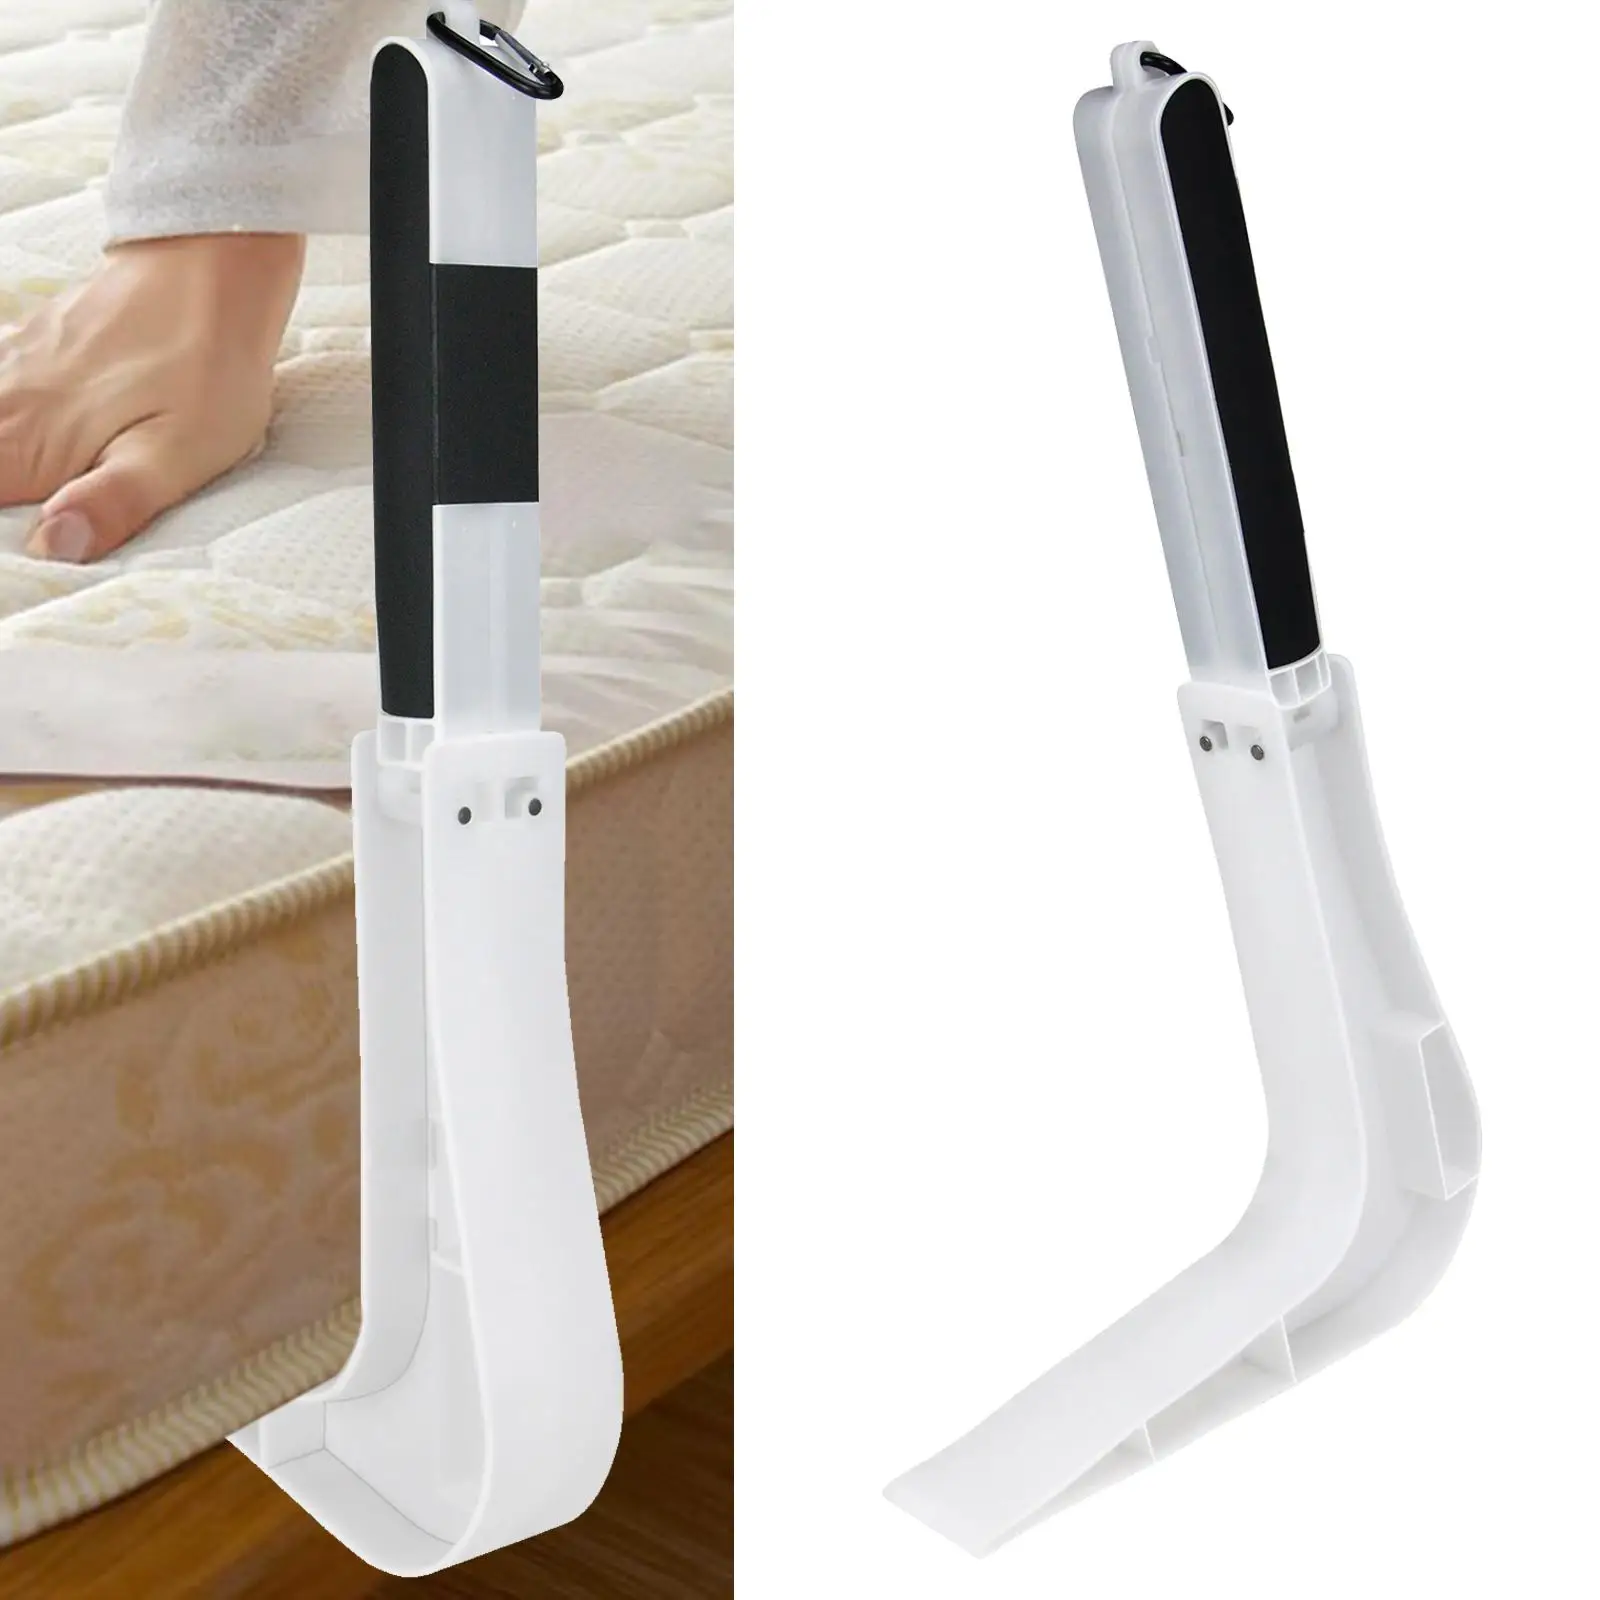 Mattress Lifter Helps Lift and Hold The Mattress Labor Saving Bed Making under Mattress Elevator Riser for Changing Sheets